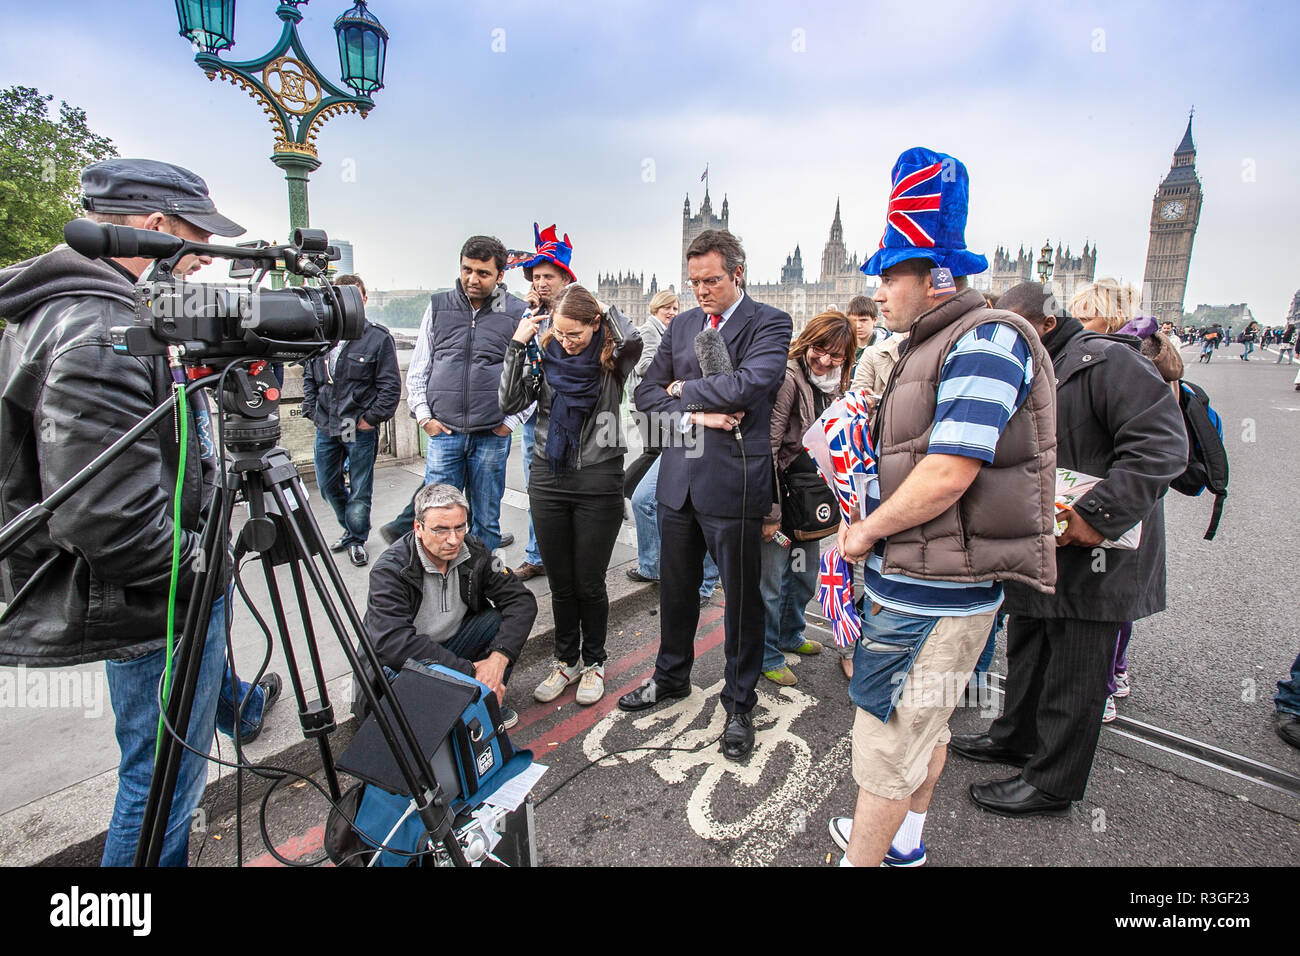 Royal Wedding of William and Kate, News media and tourists watch the ceremony on Westminster Bridge via a TV Stock Photo